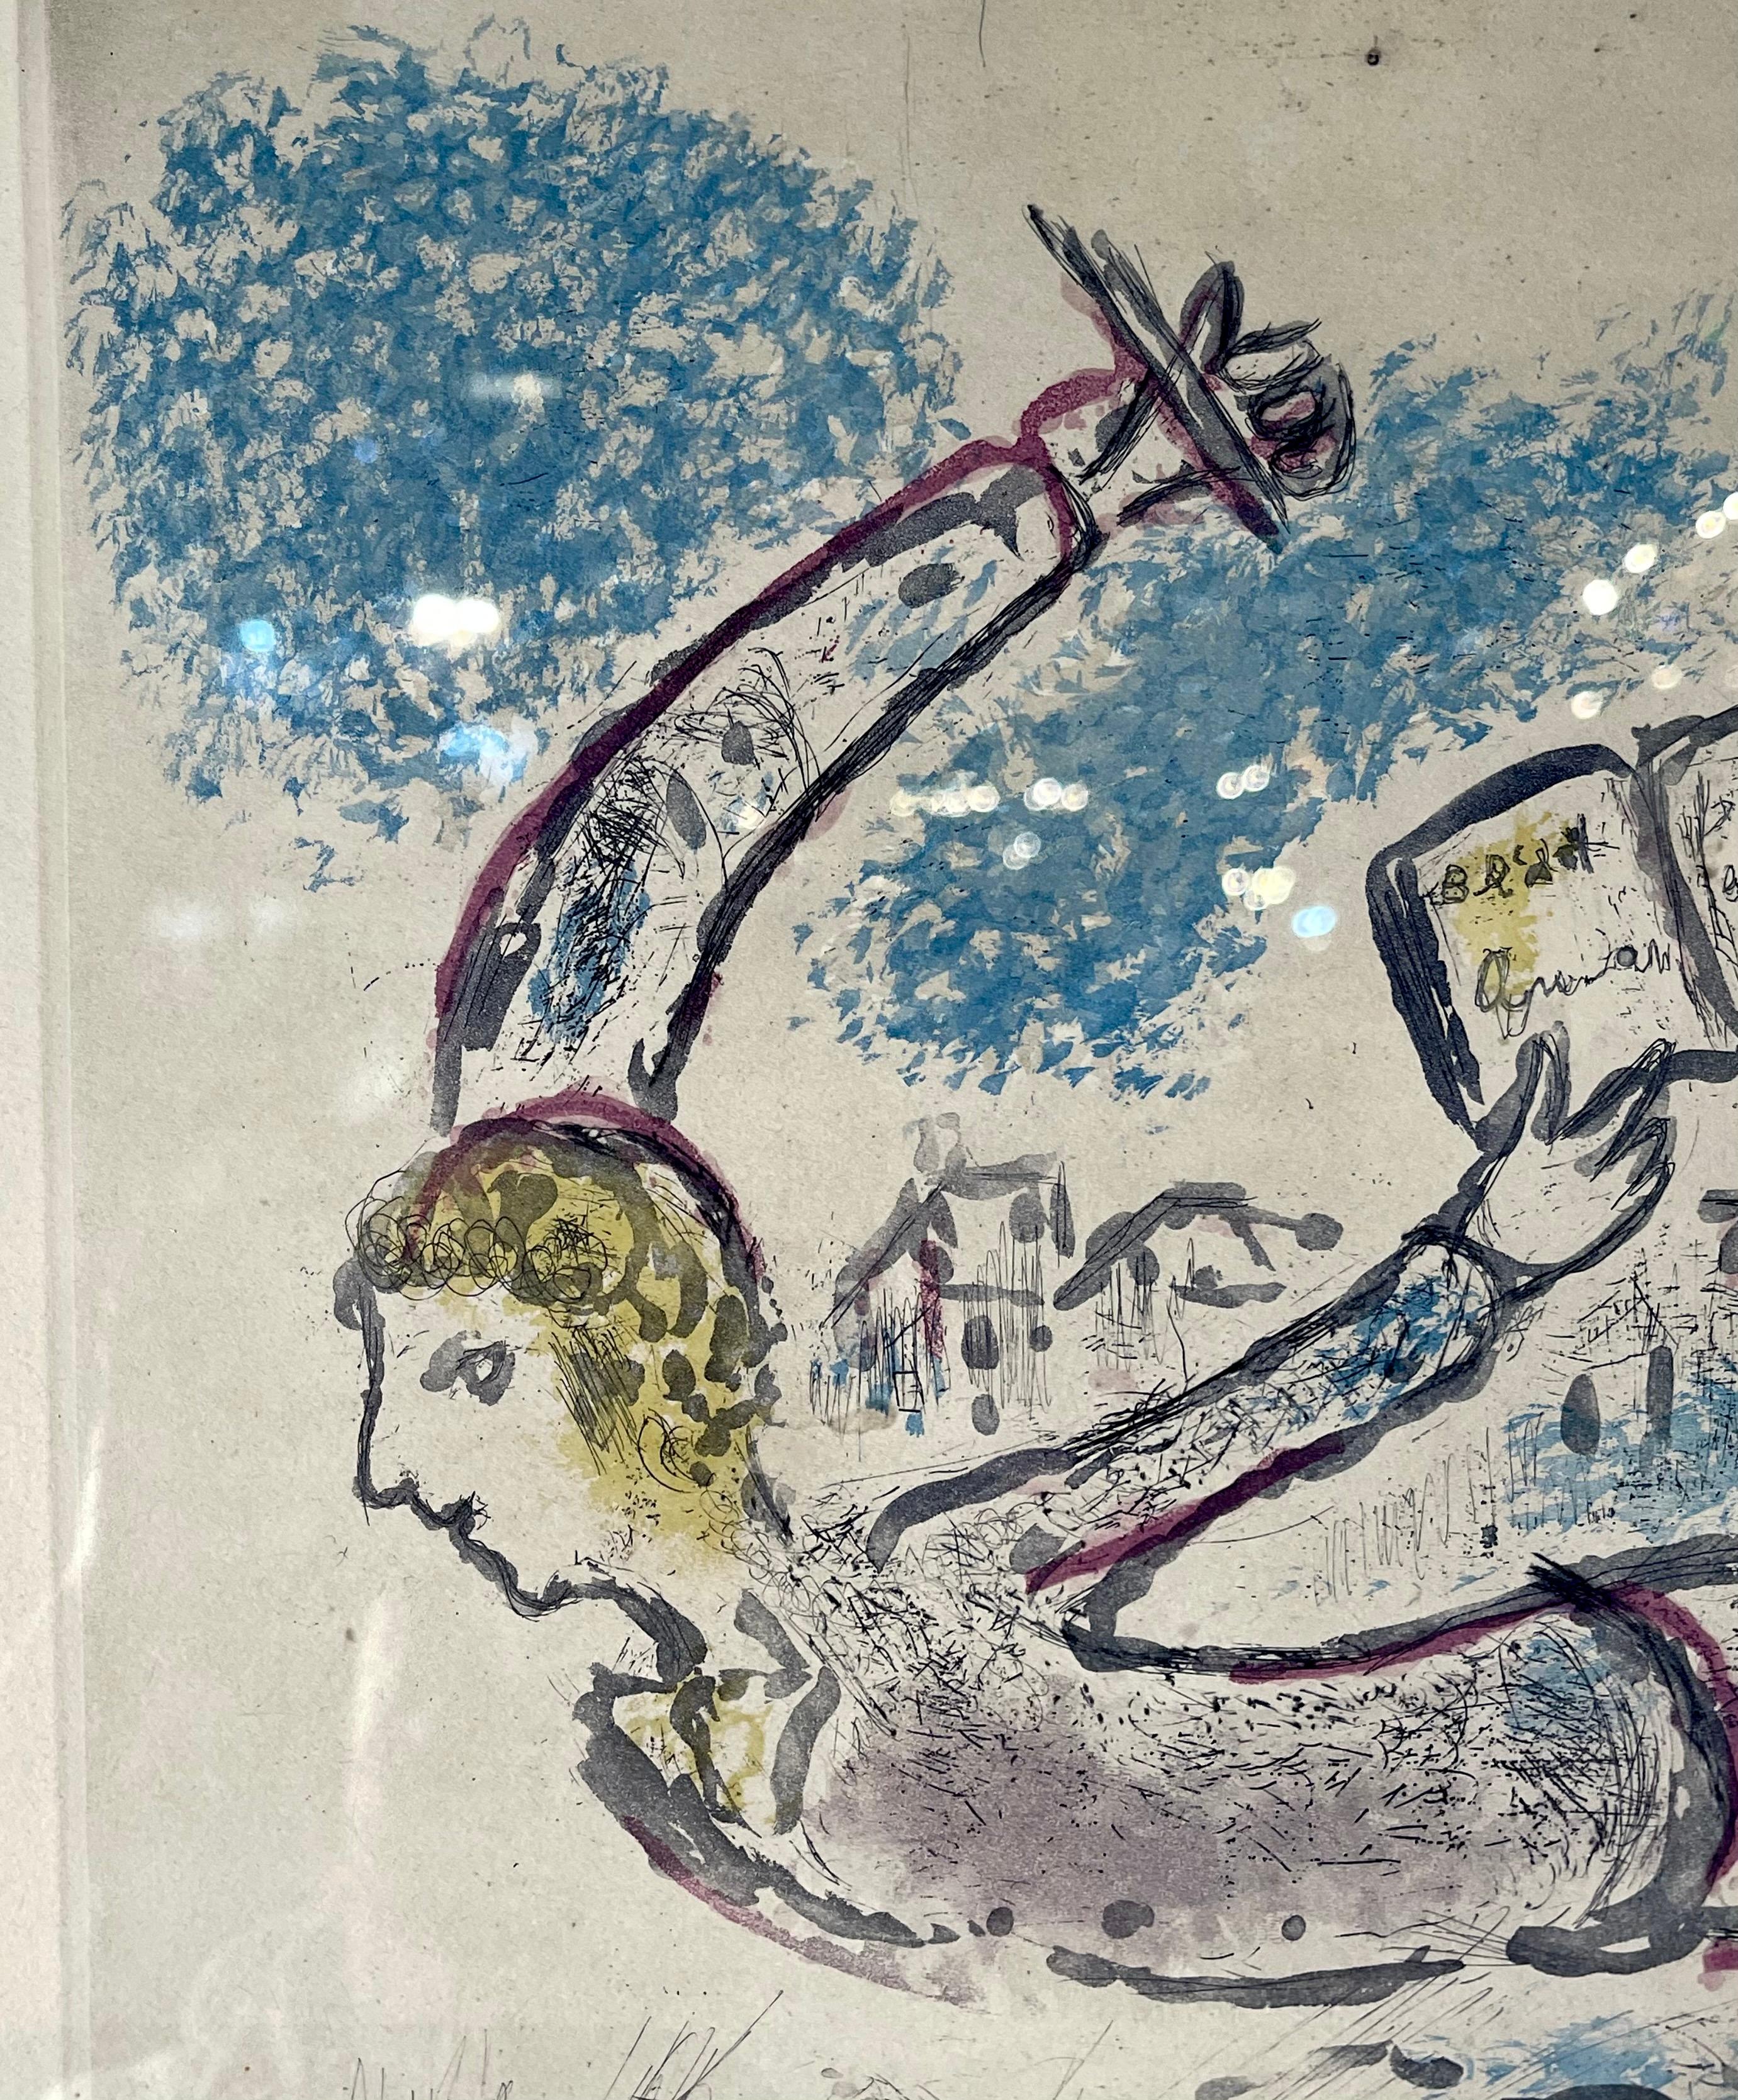 20th Century Marc Chagall, Etching Plate 2, from De Mauvais Sujets (Bad Elements), 1958